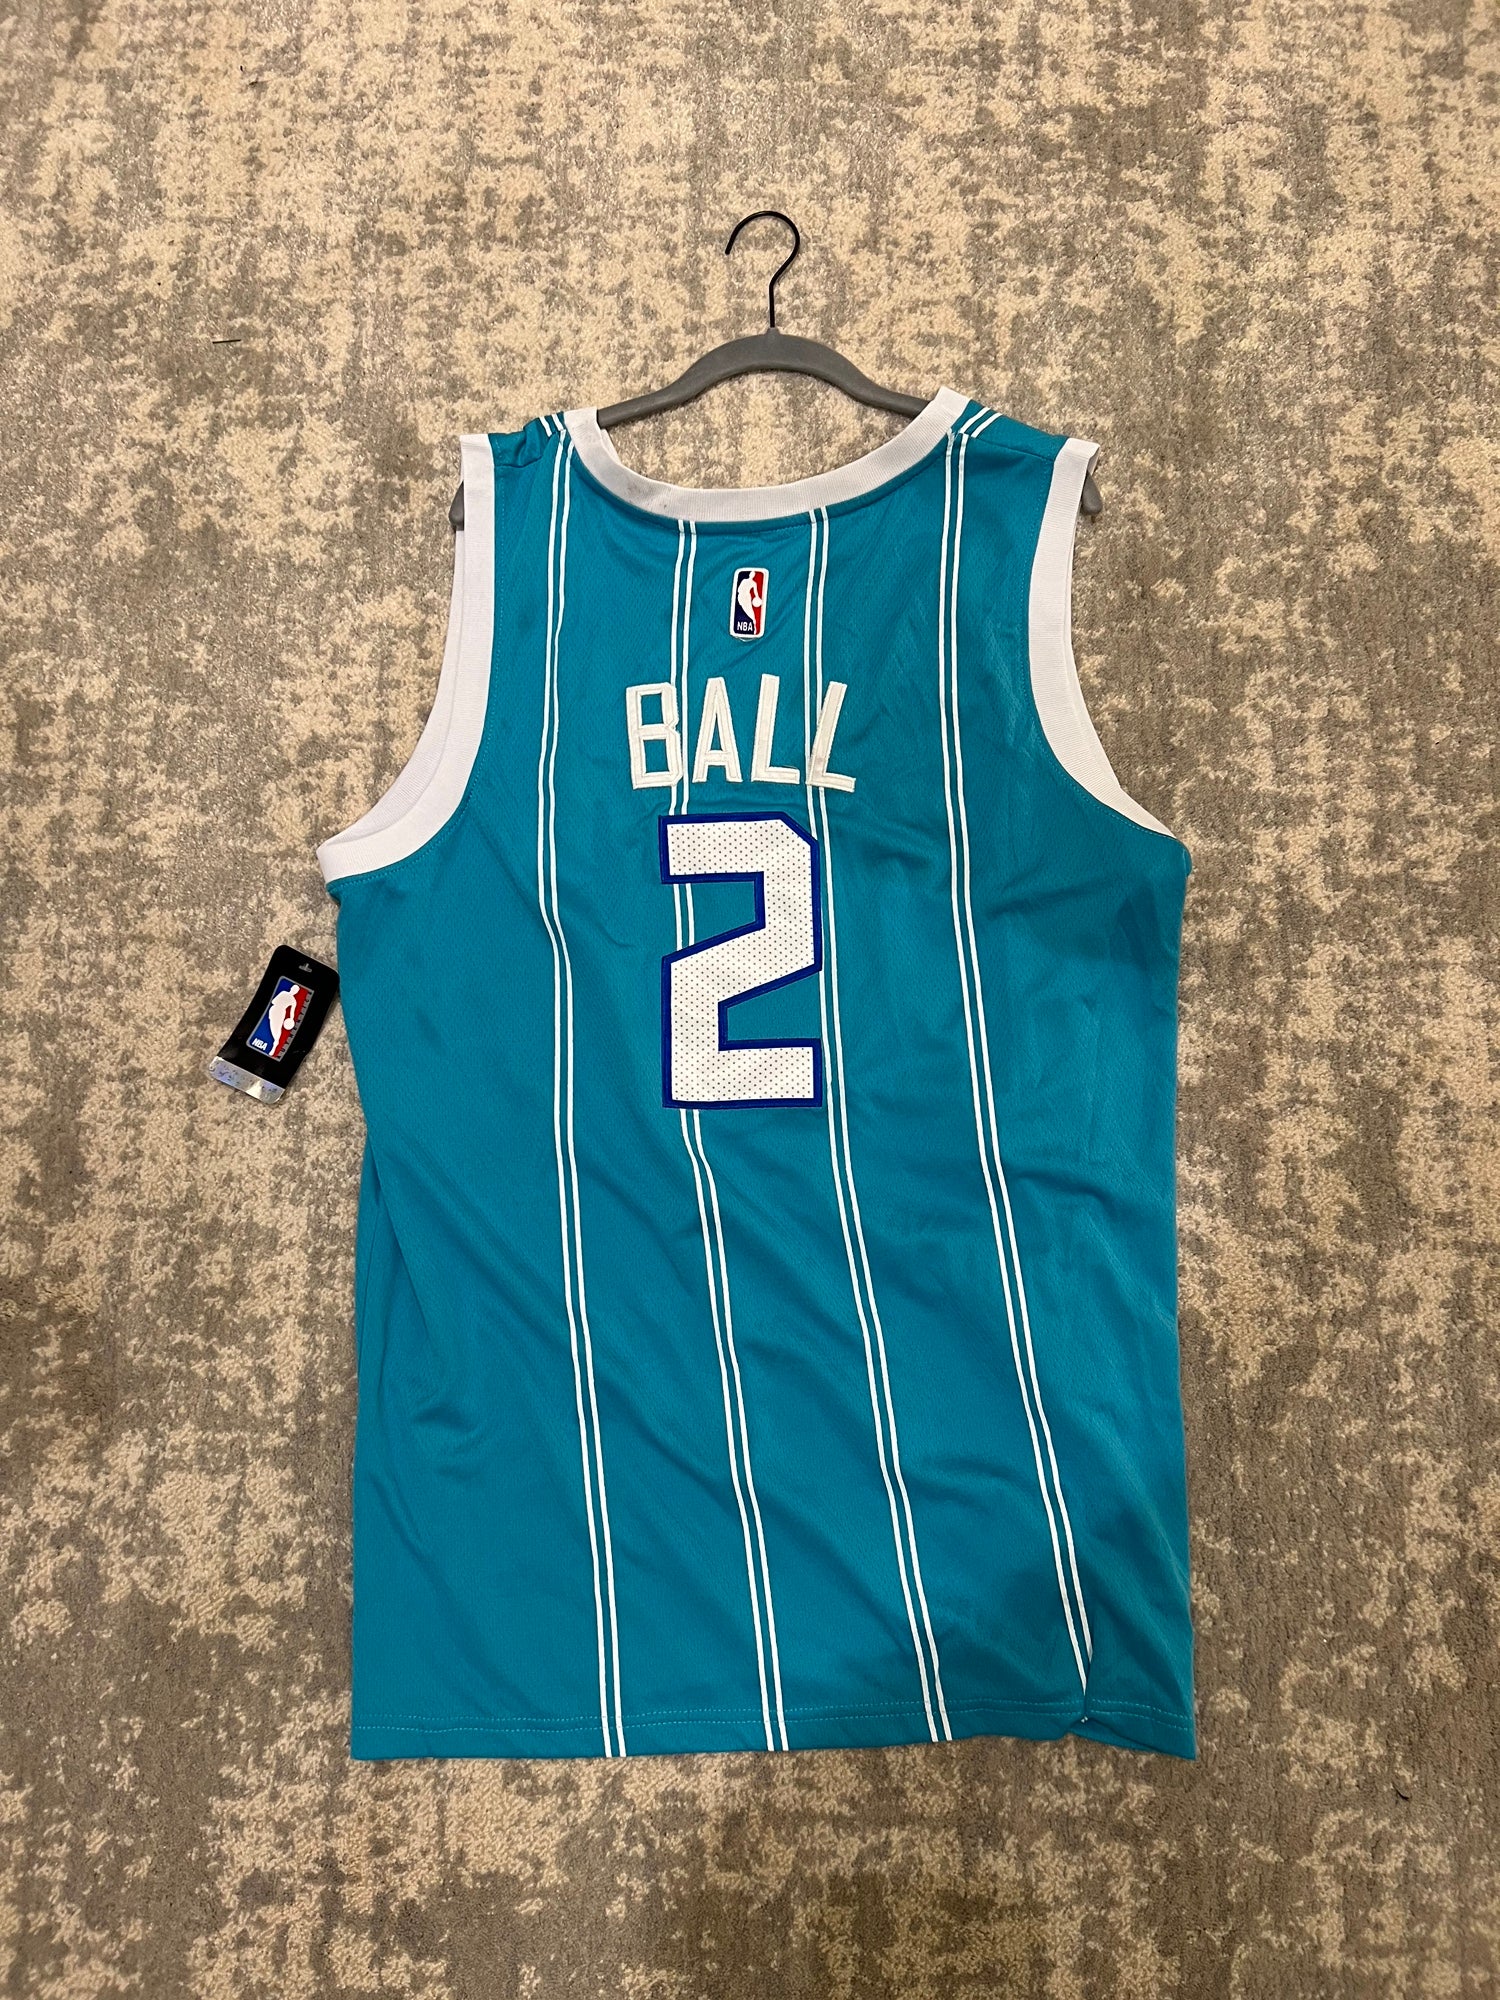 lamelo ball jersey large